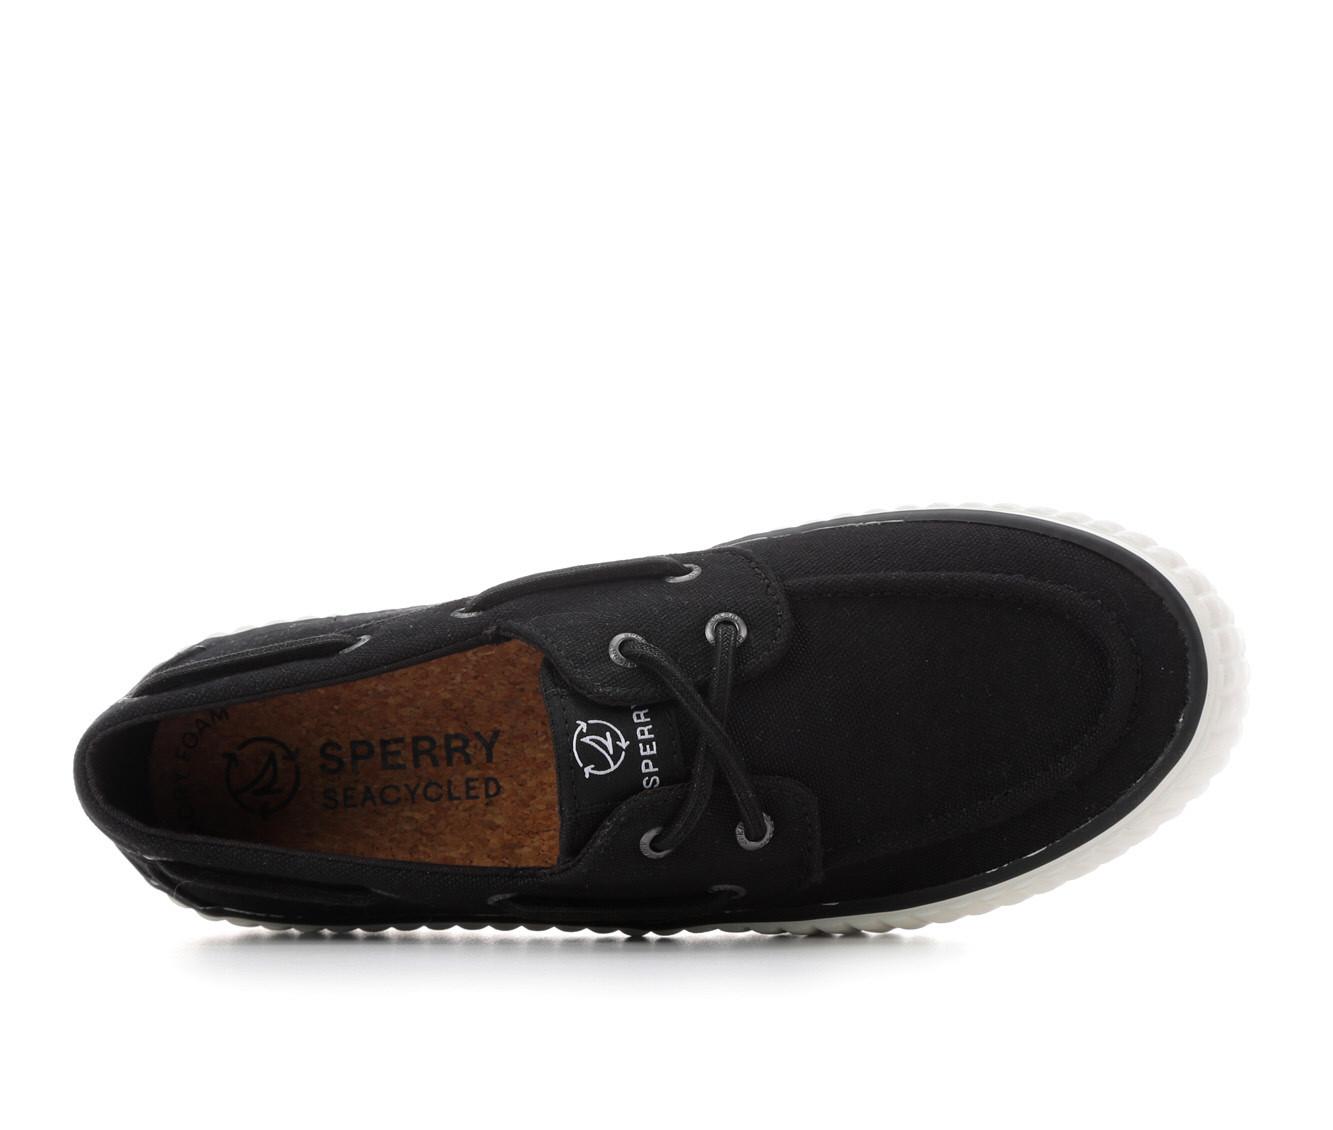 Women's Sperry SeaCycled Pier Wave Boat Platform Boat Shoes